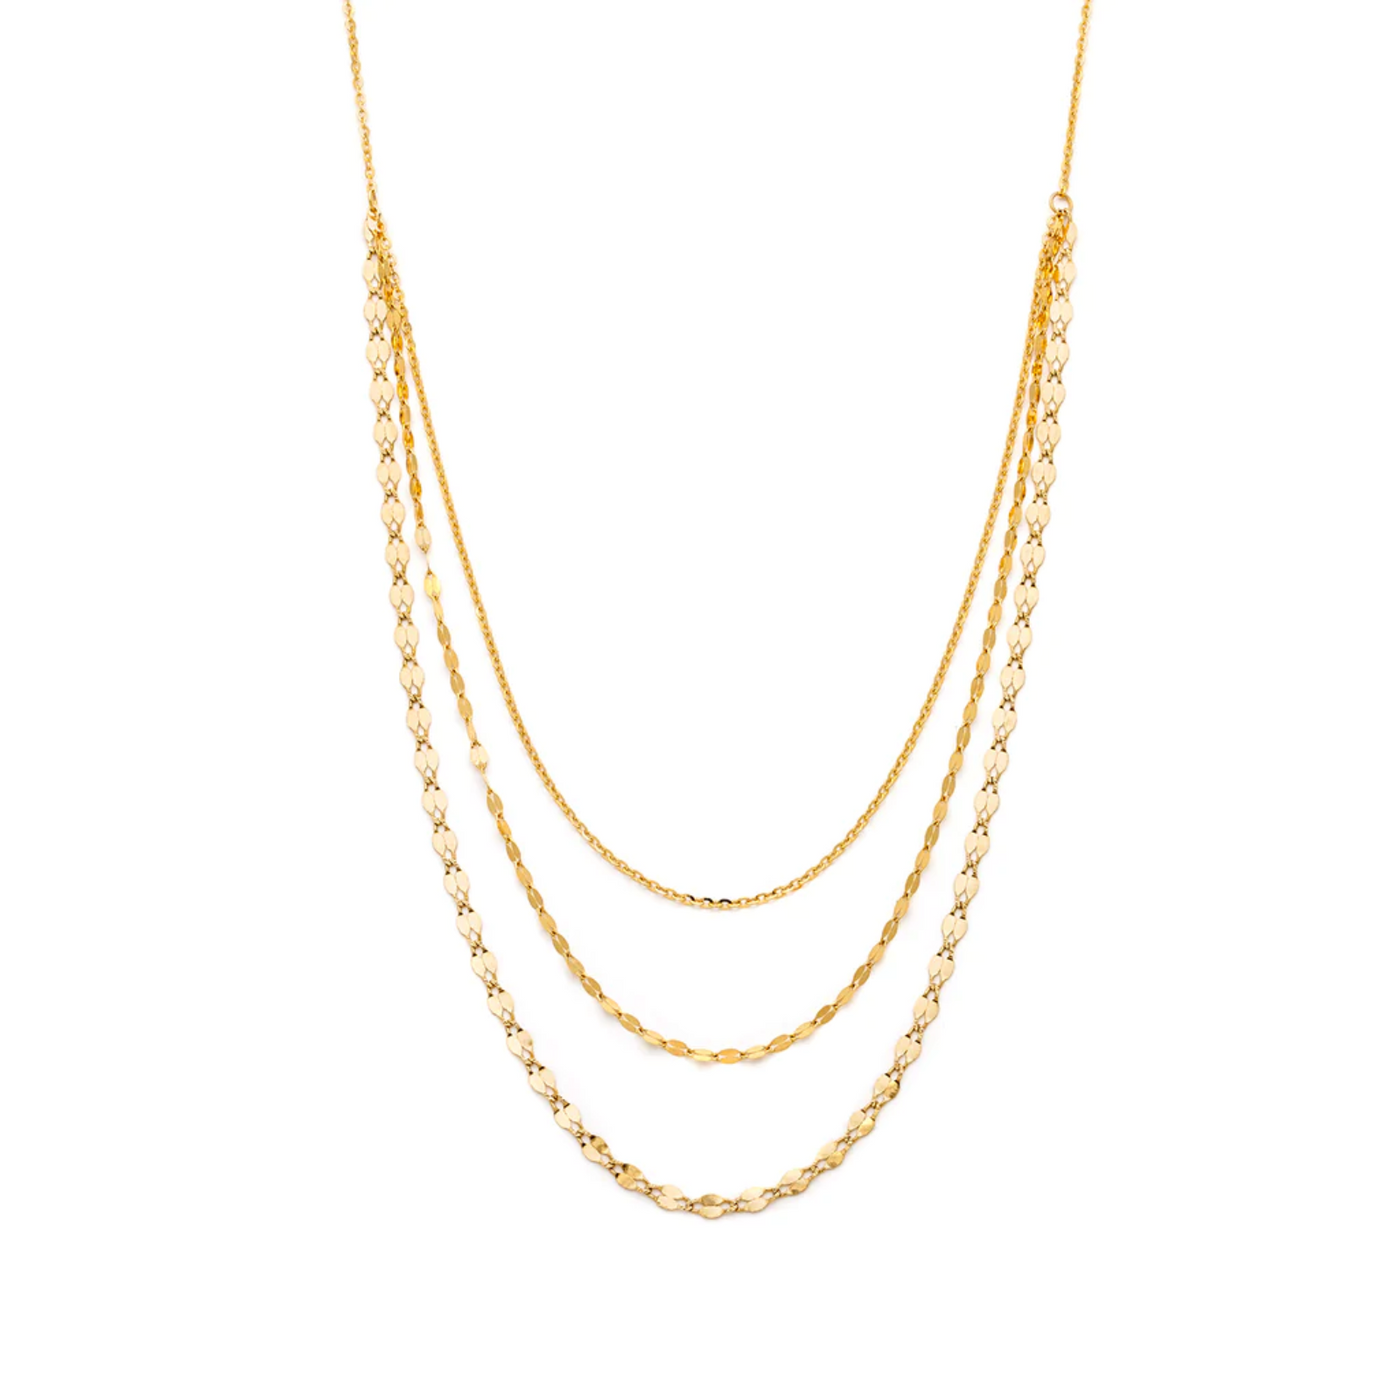 Leah Alexandra Layered Shimmer Necklace